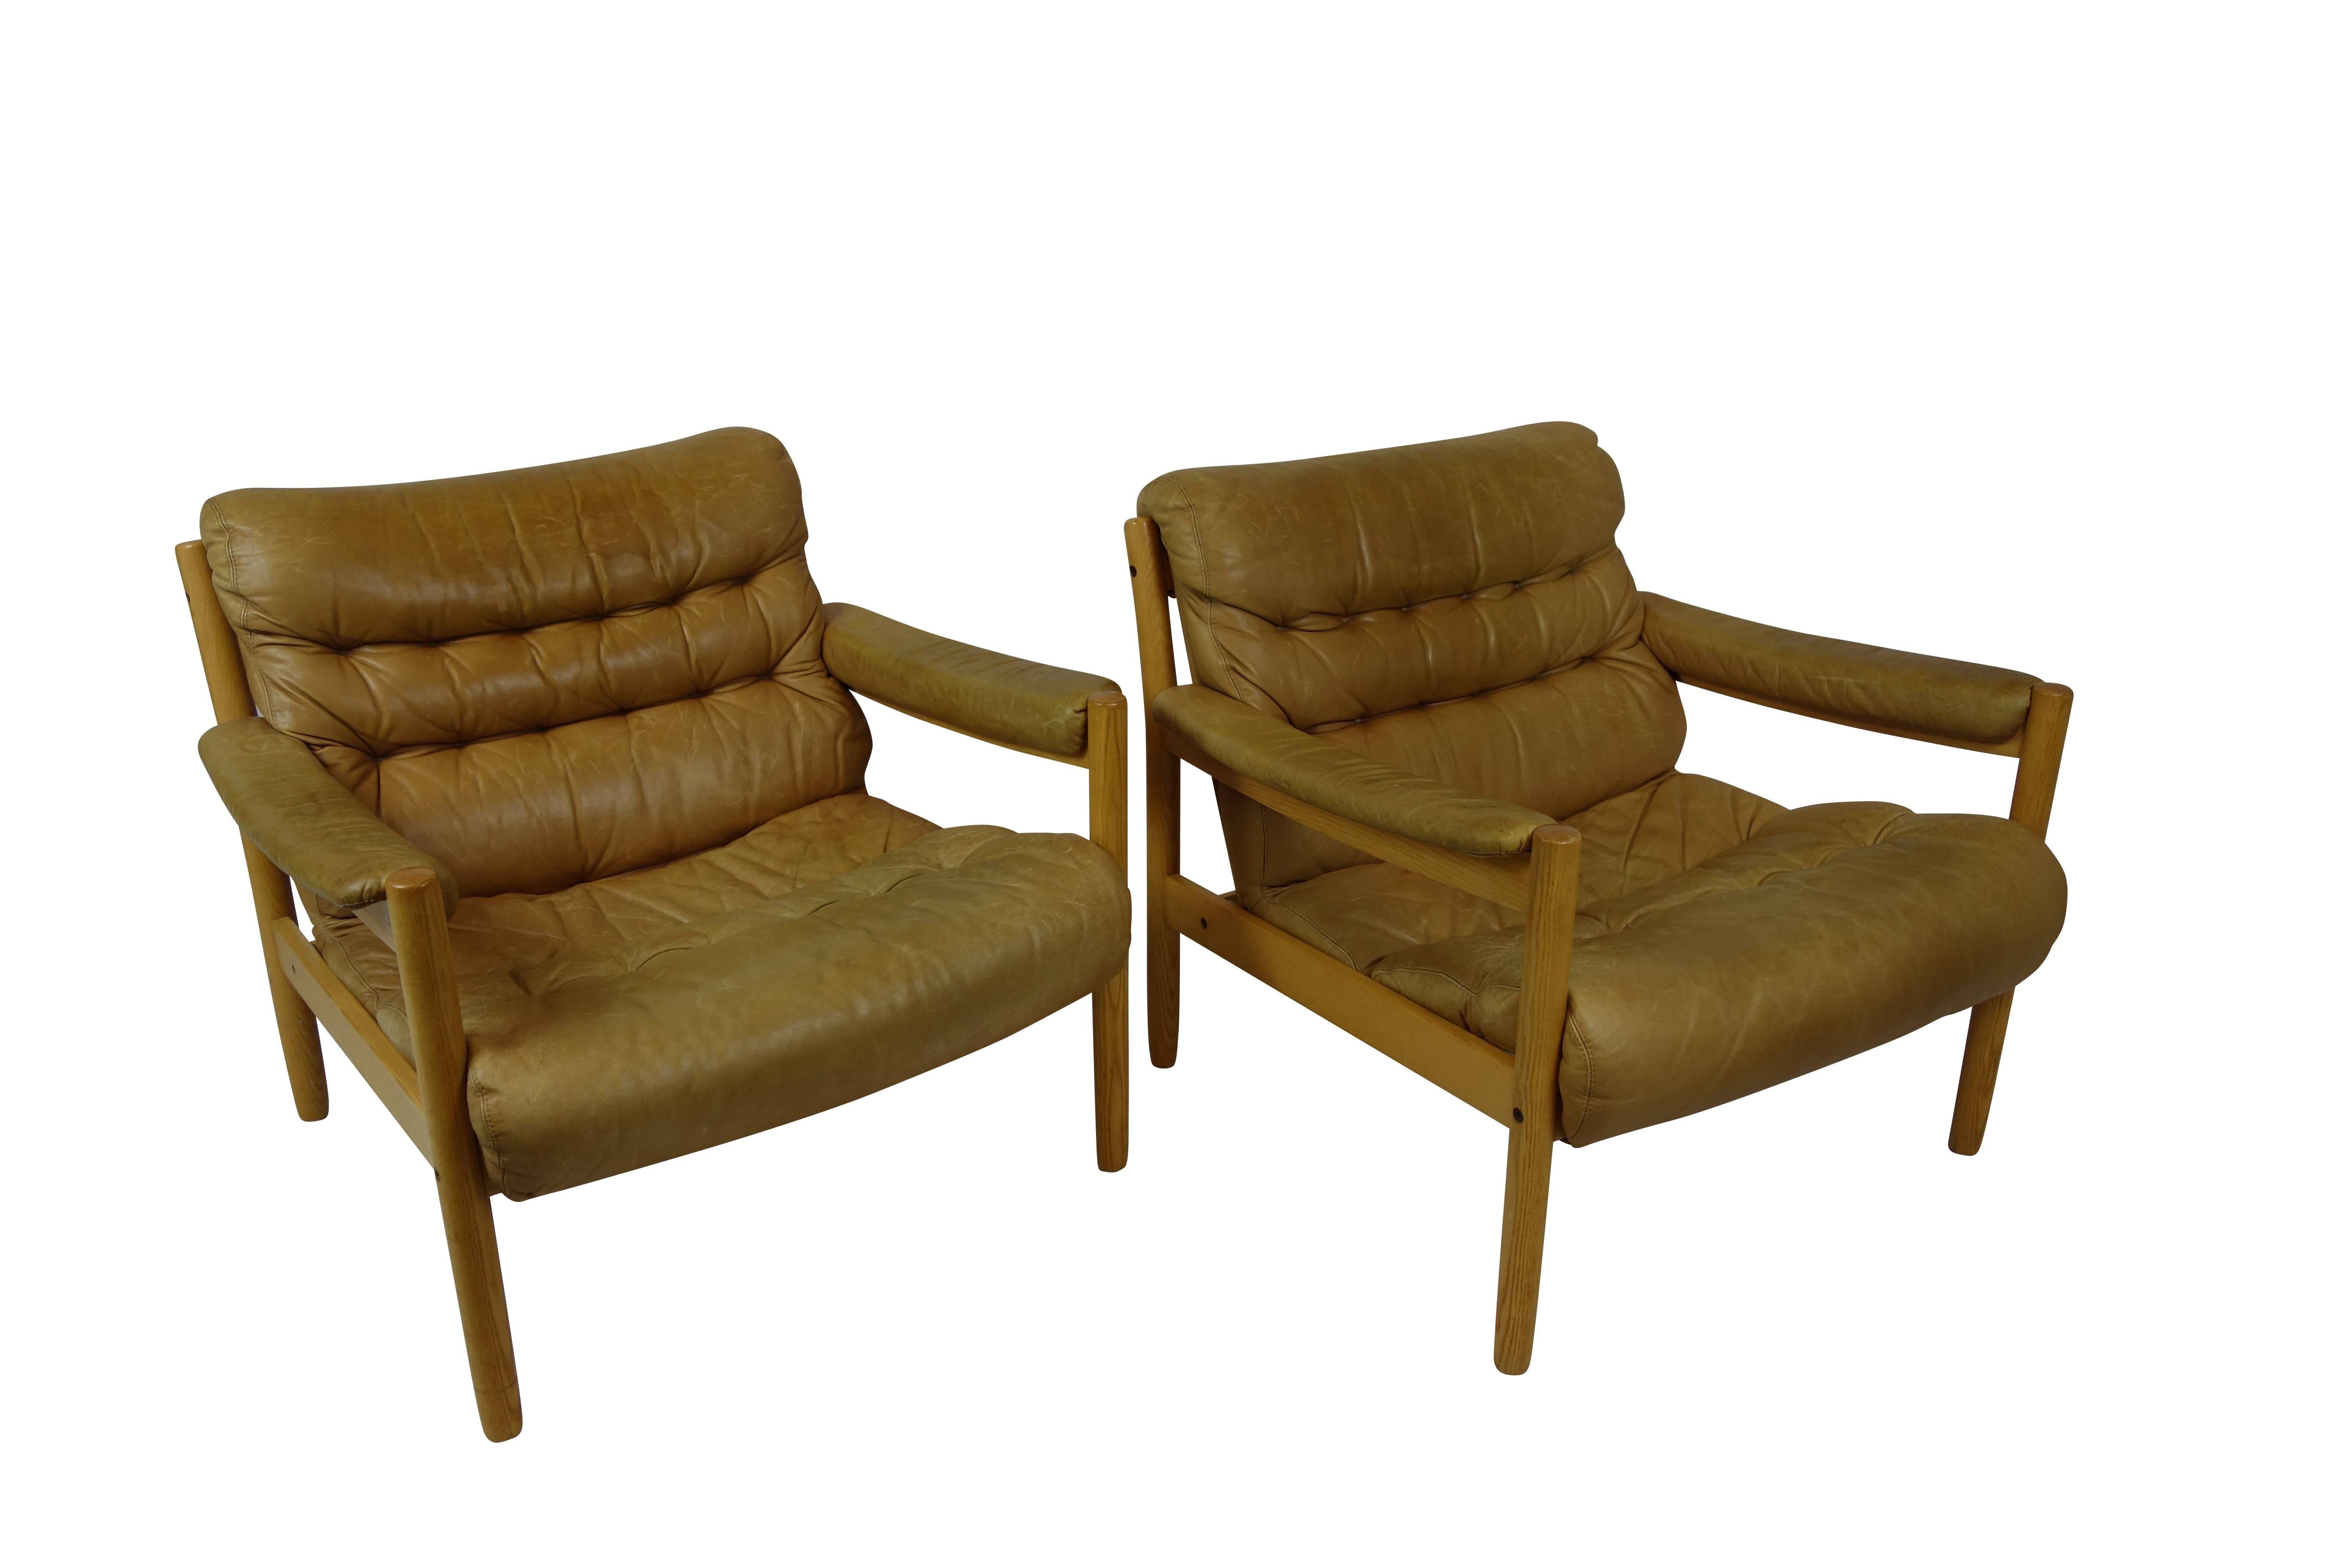 This is a pair of easy chairs in beechwood by Bruno Matthson produced for Dux, in their original tan leather upholstery.